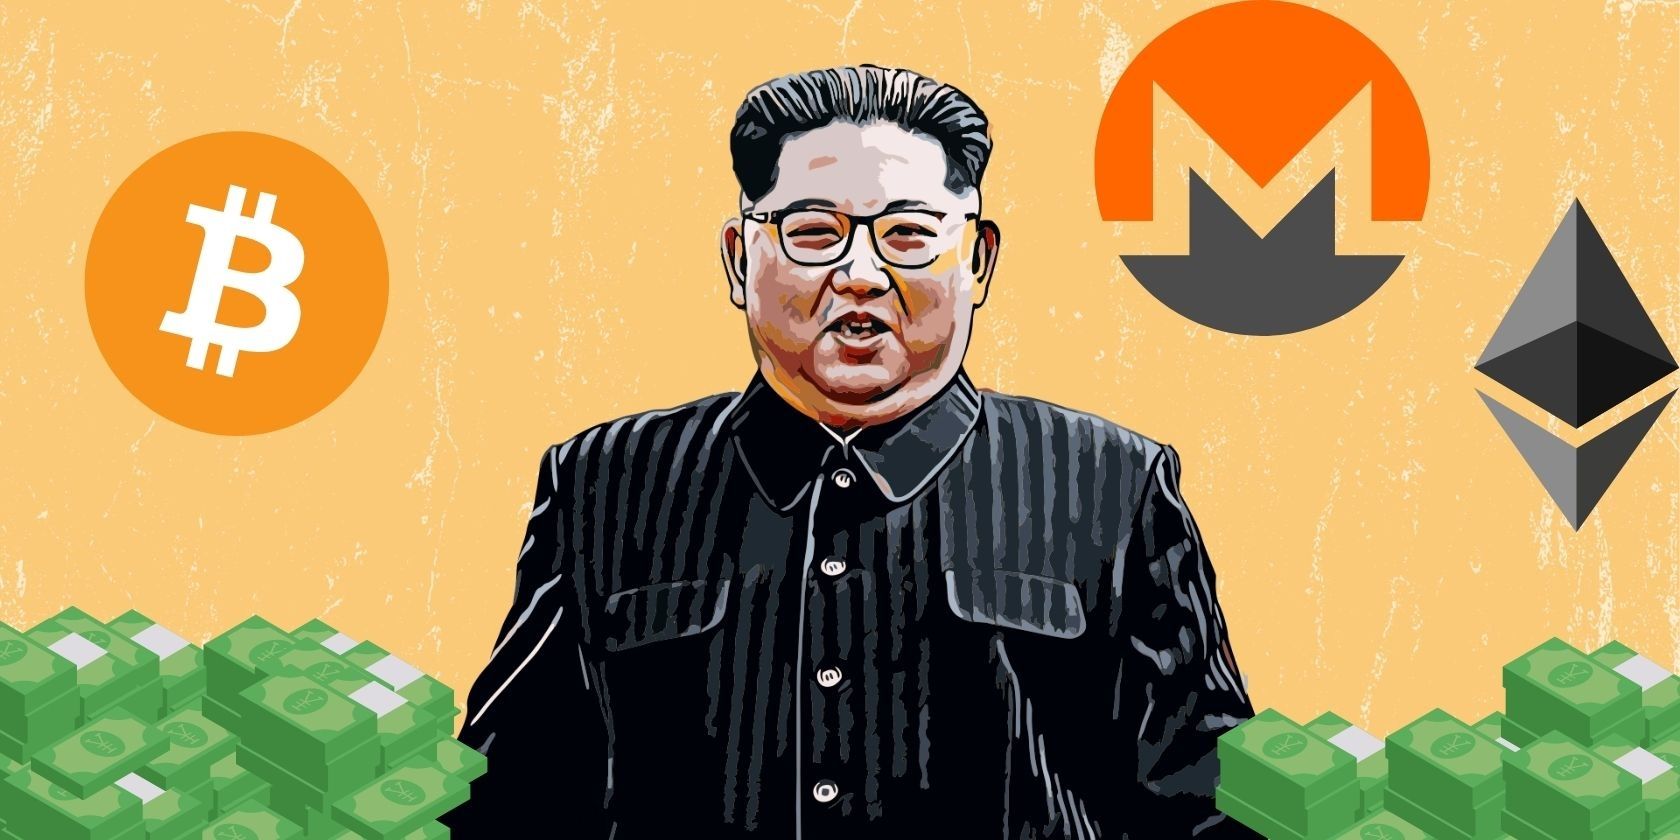 North Korean dictator Kim Jong Un graphic with crypto logos in background